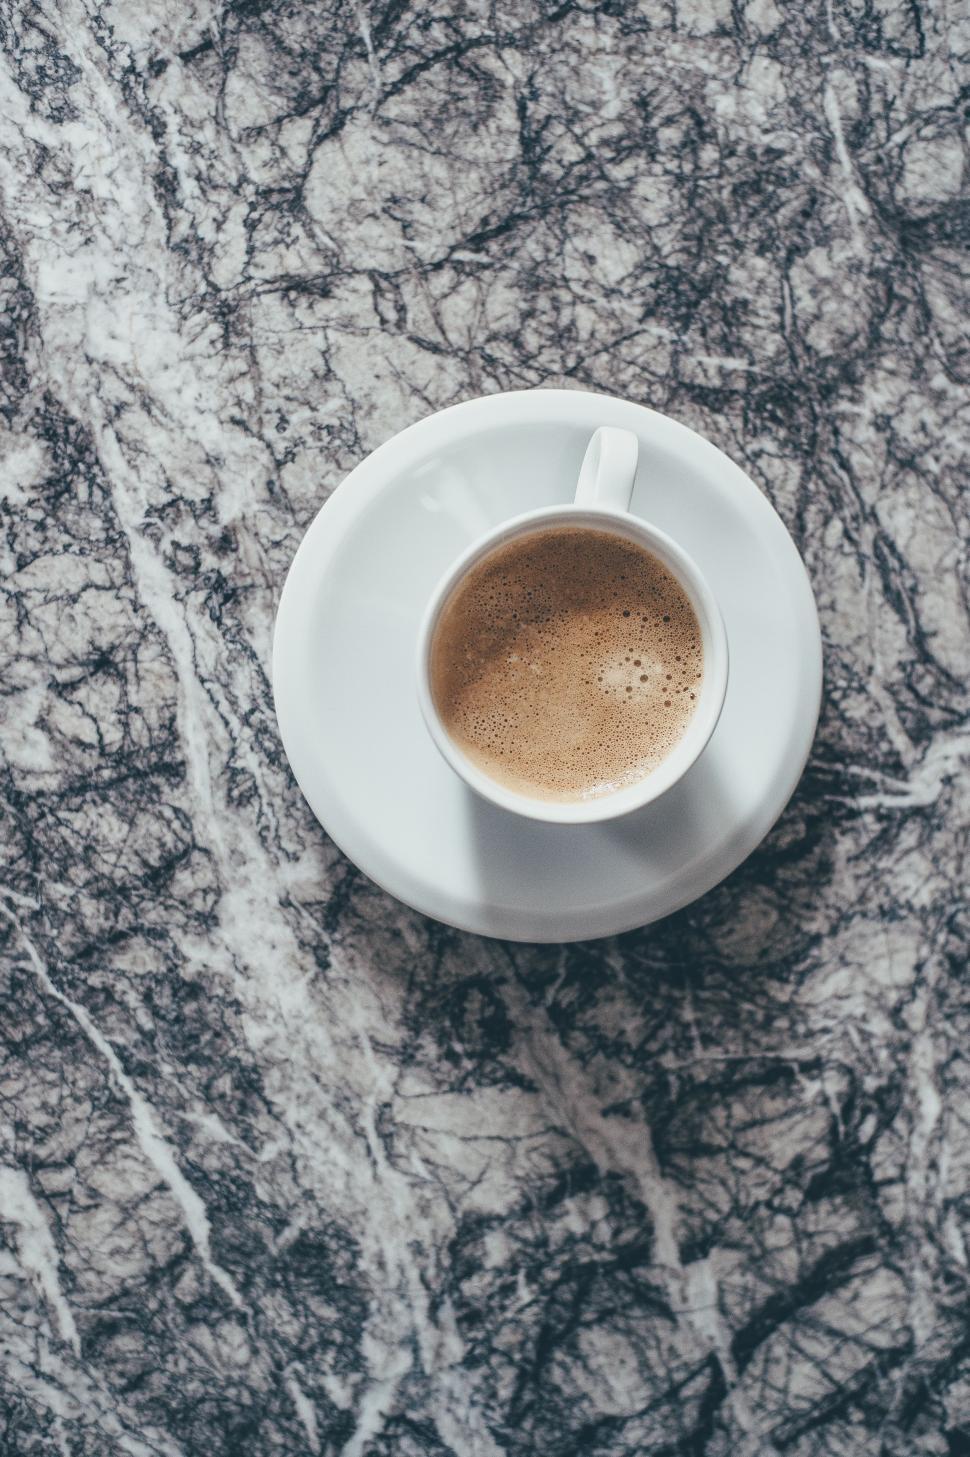 Free Image of A Cup of Coffee on a White Saucer 